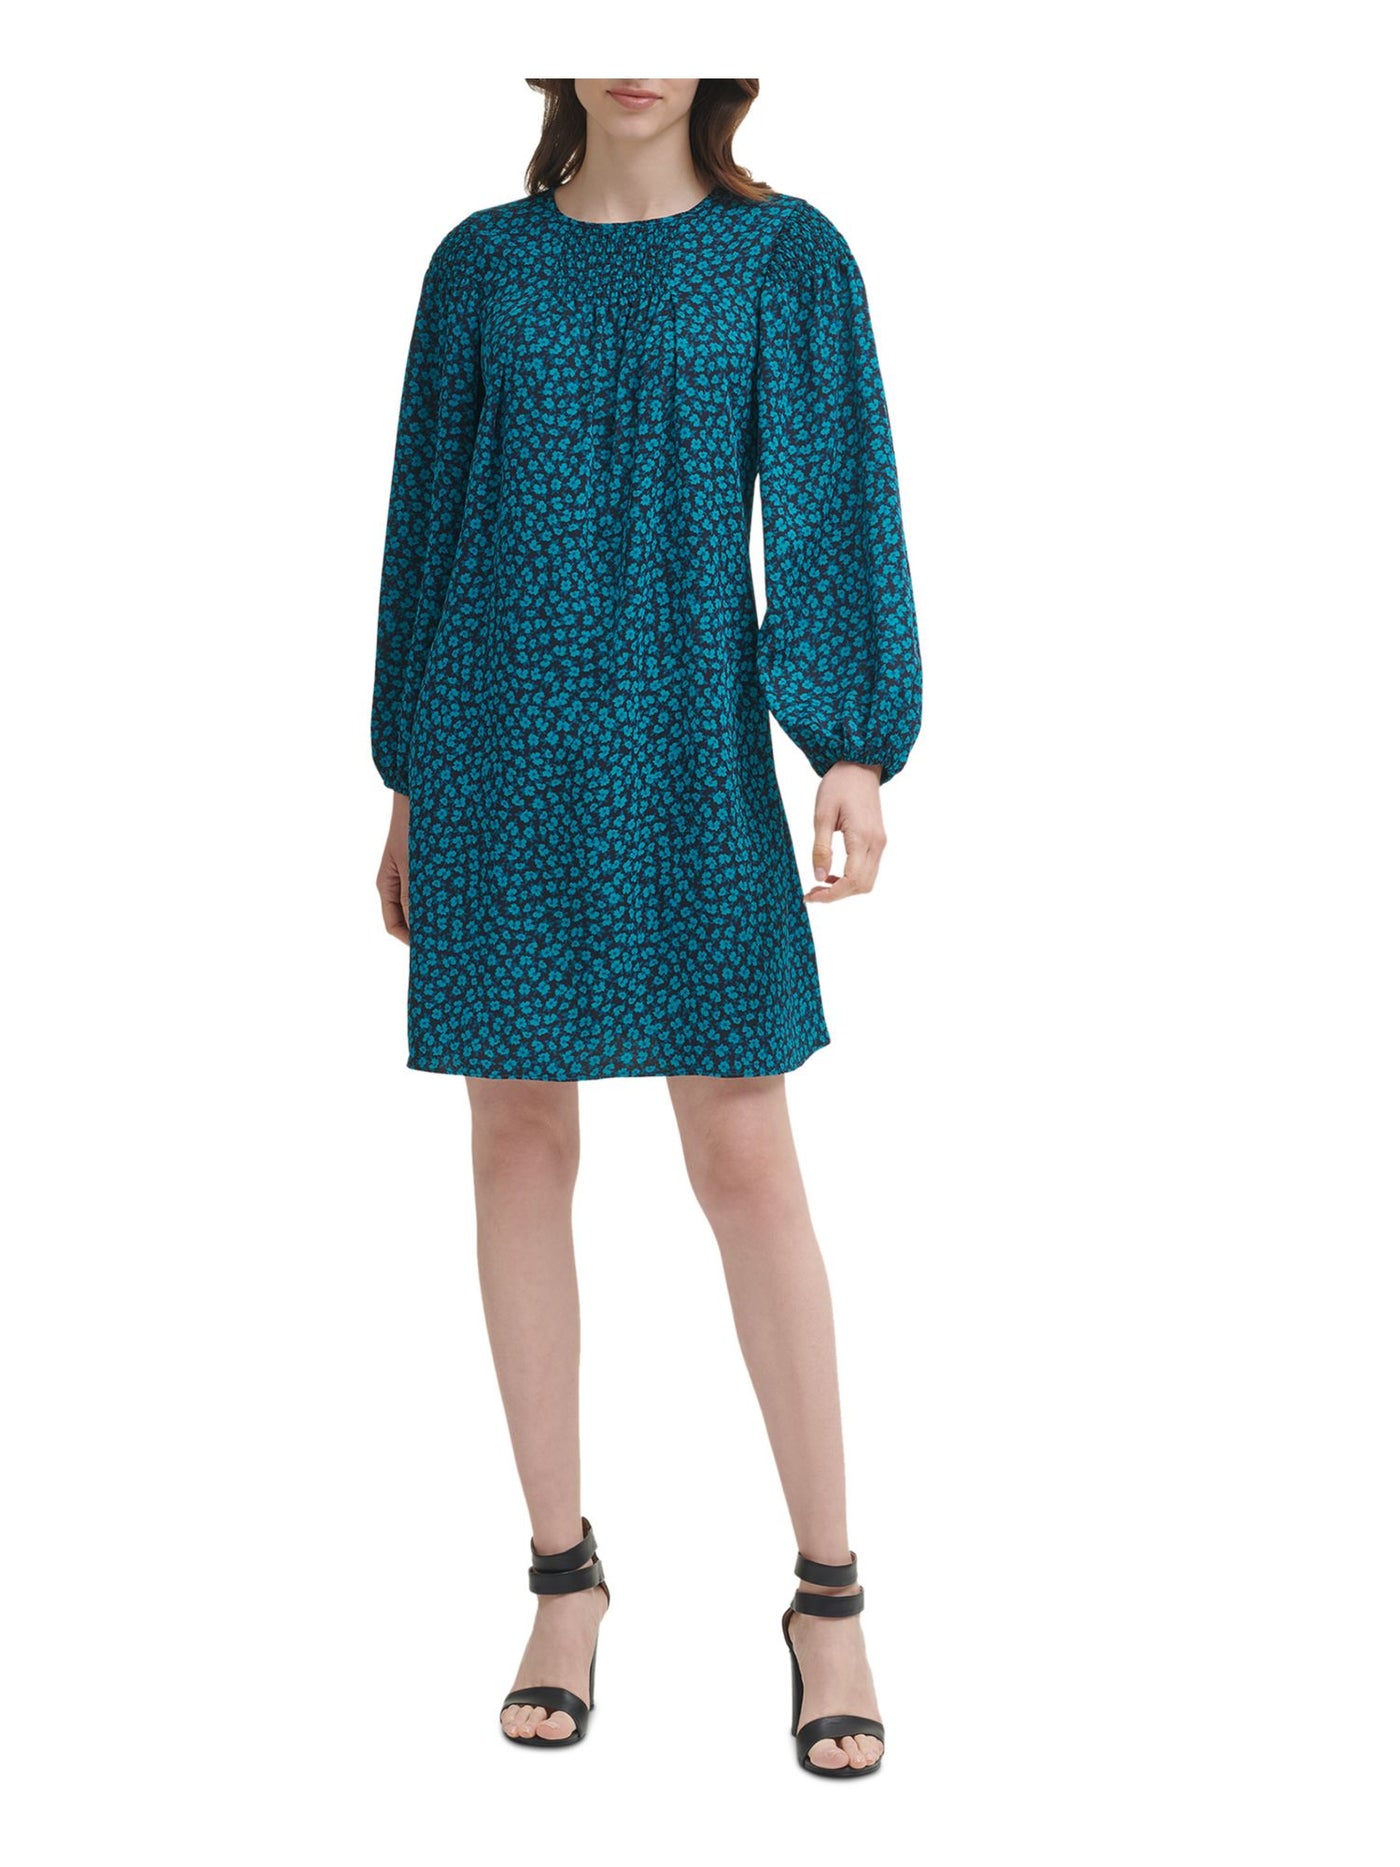 DKNY Womens Green Smocked Floral Long Sleeve Round Neck Short Evening Shift Dress 6